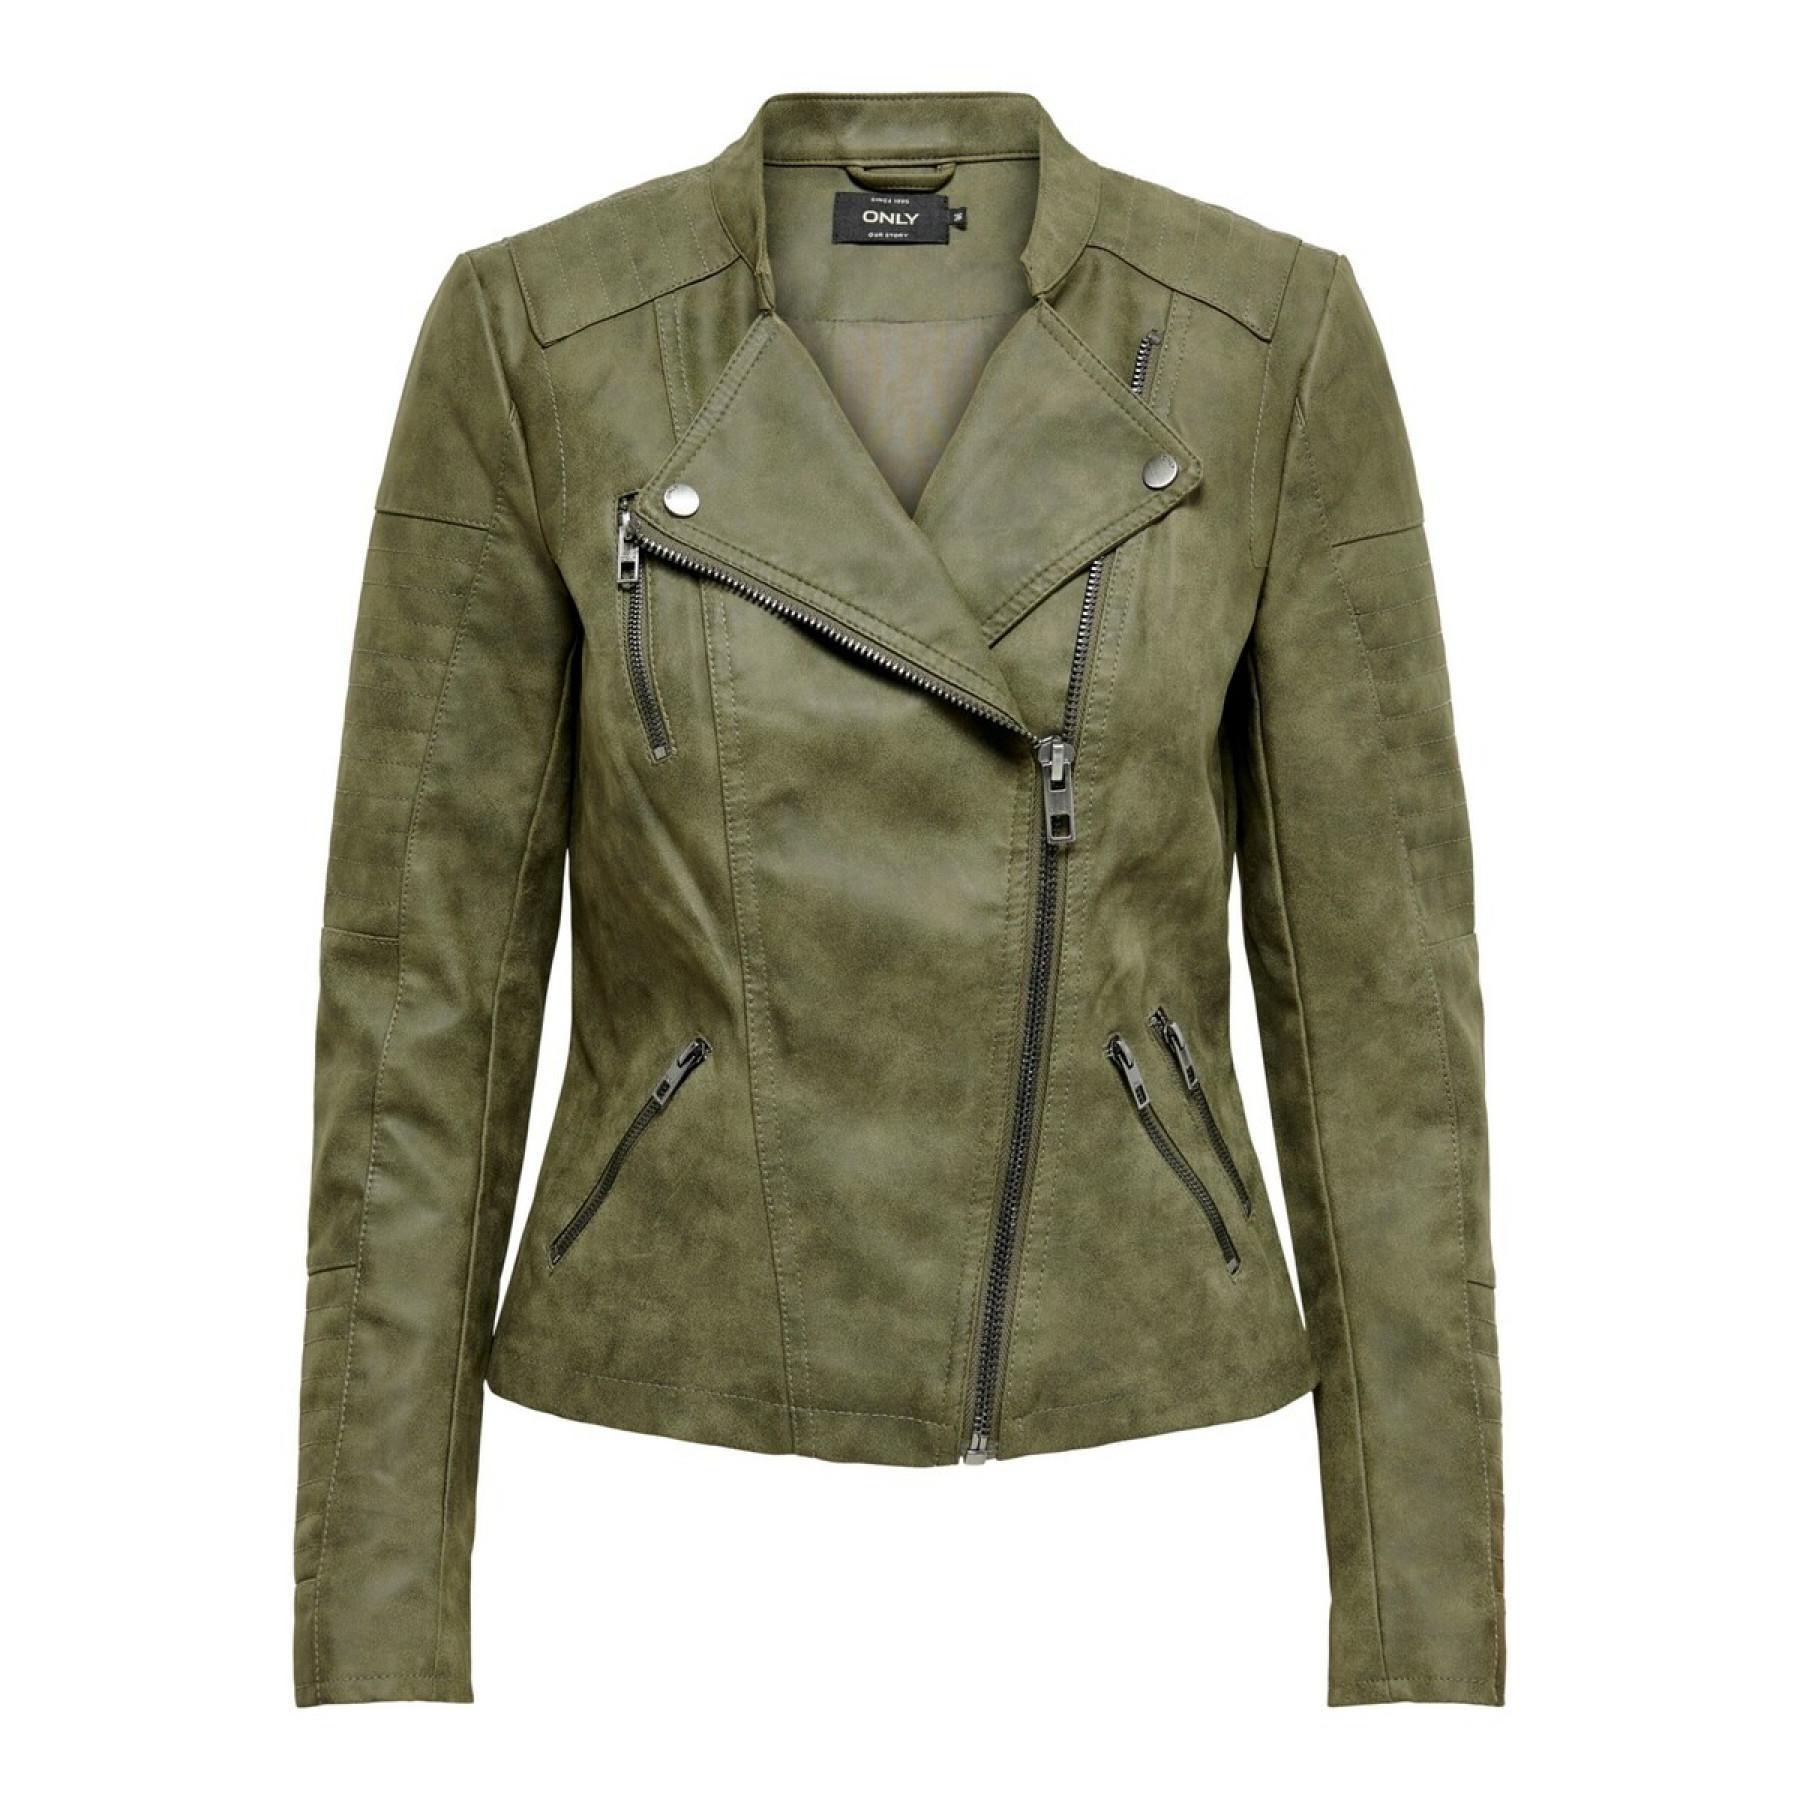 Leather jacket woman Only Ava imitation cuir biker